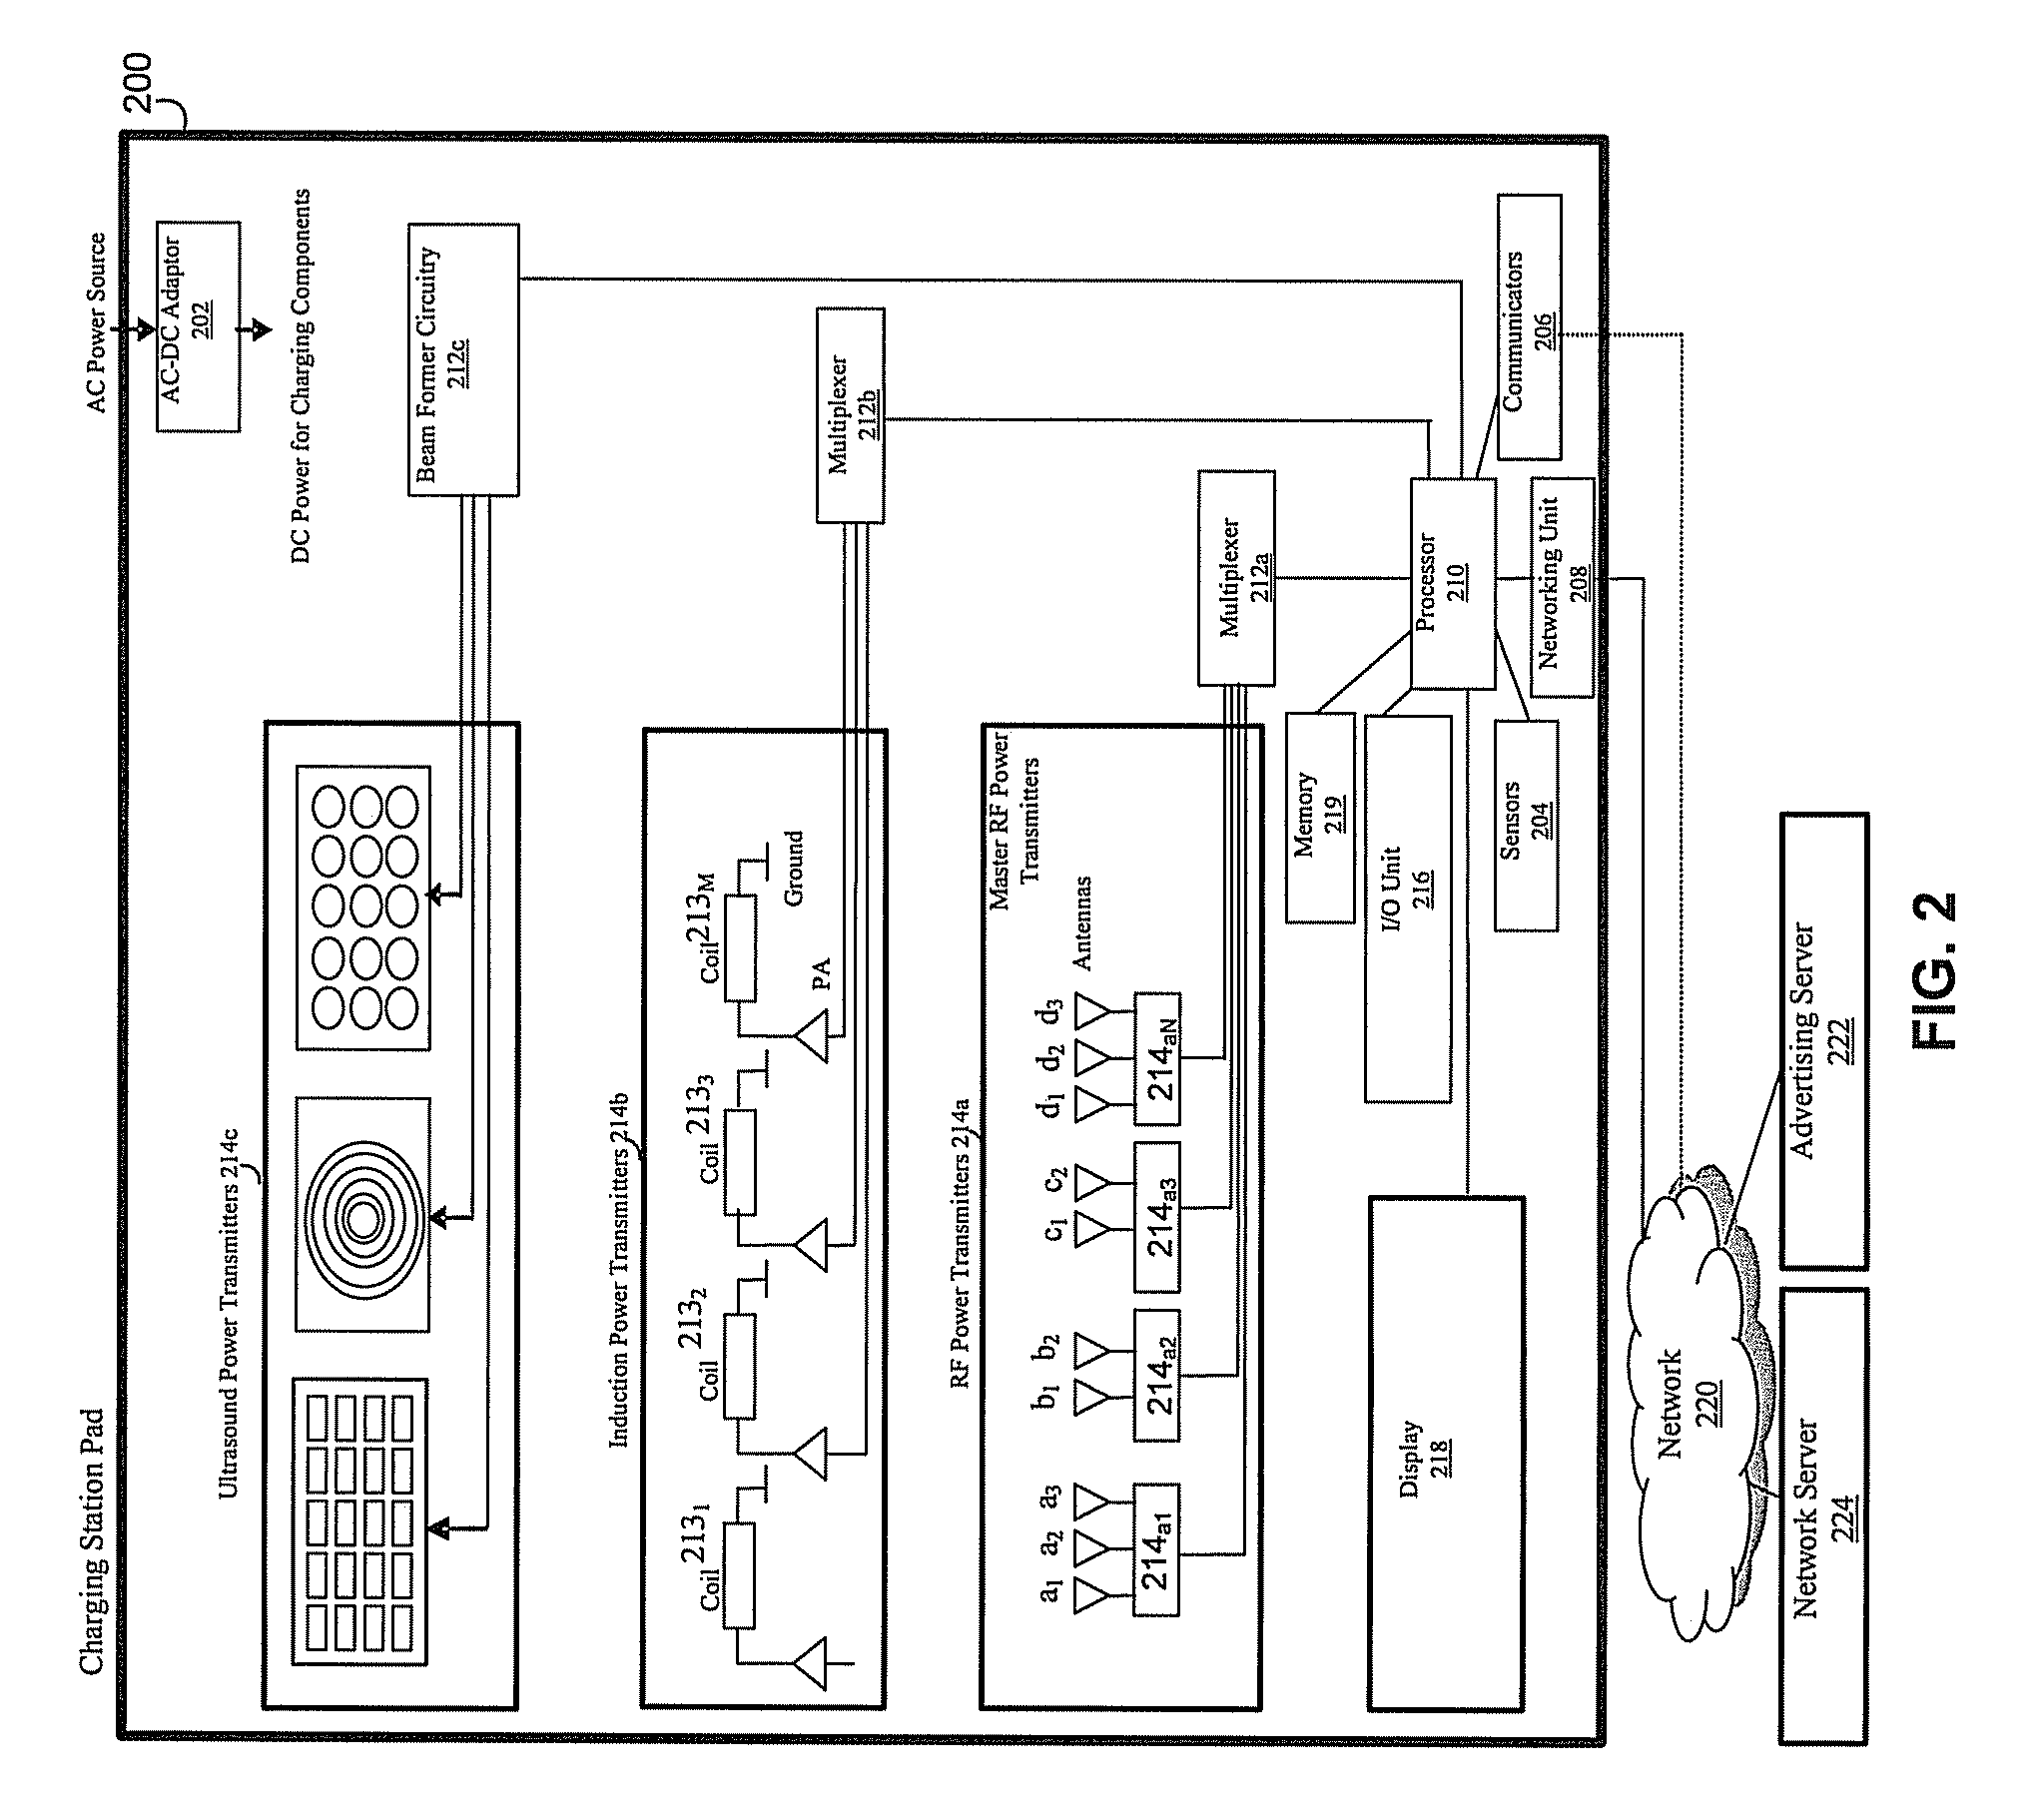 Method and system for a battery charging station utilizing multiple types of power transmitters for wireless battery charging